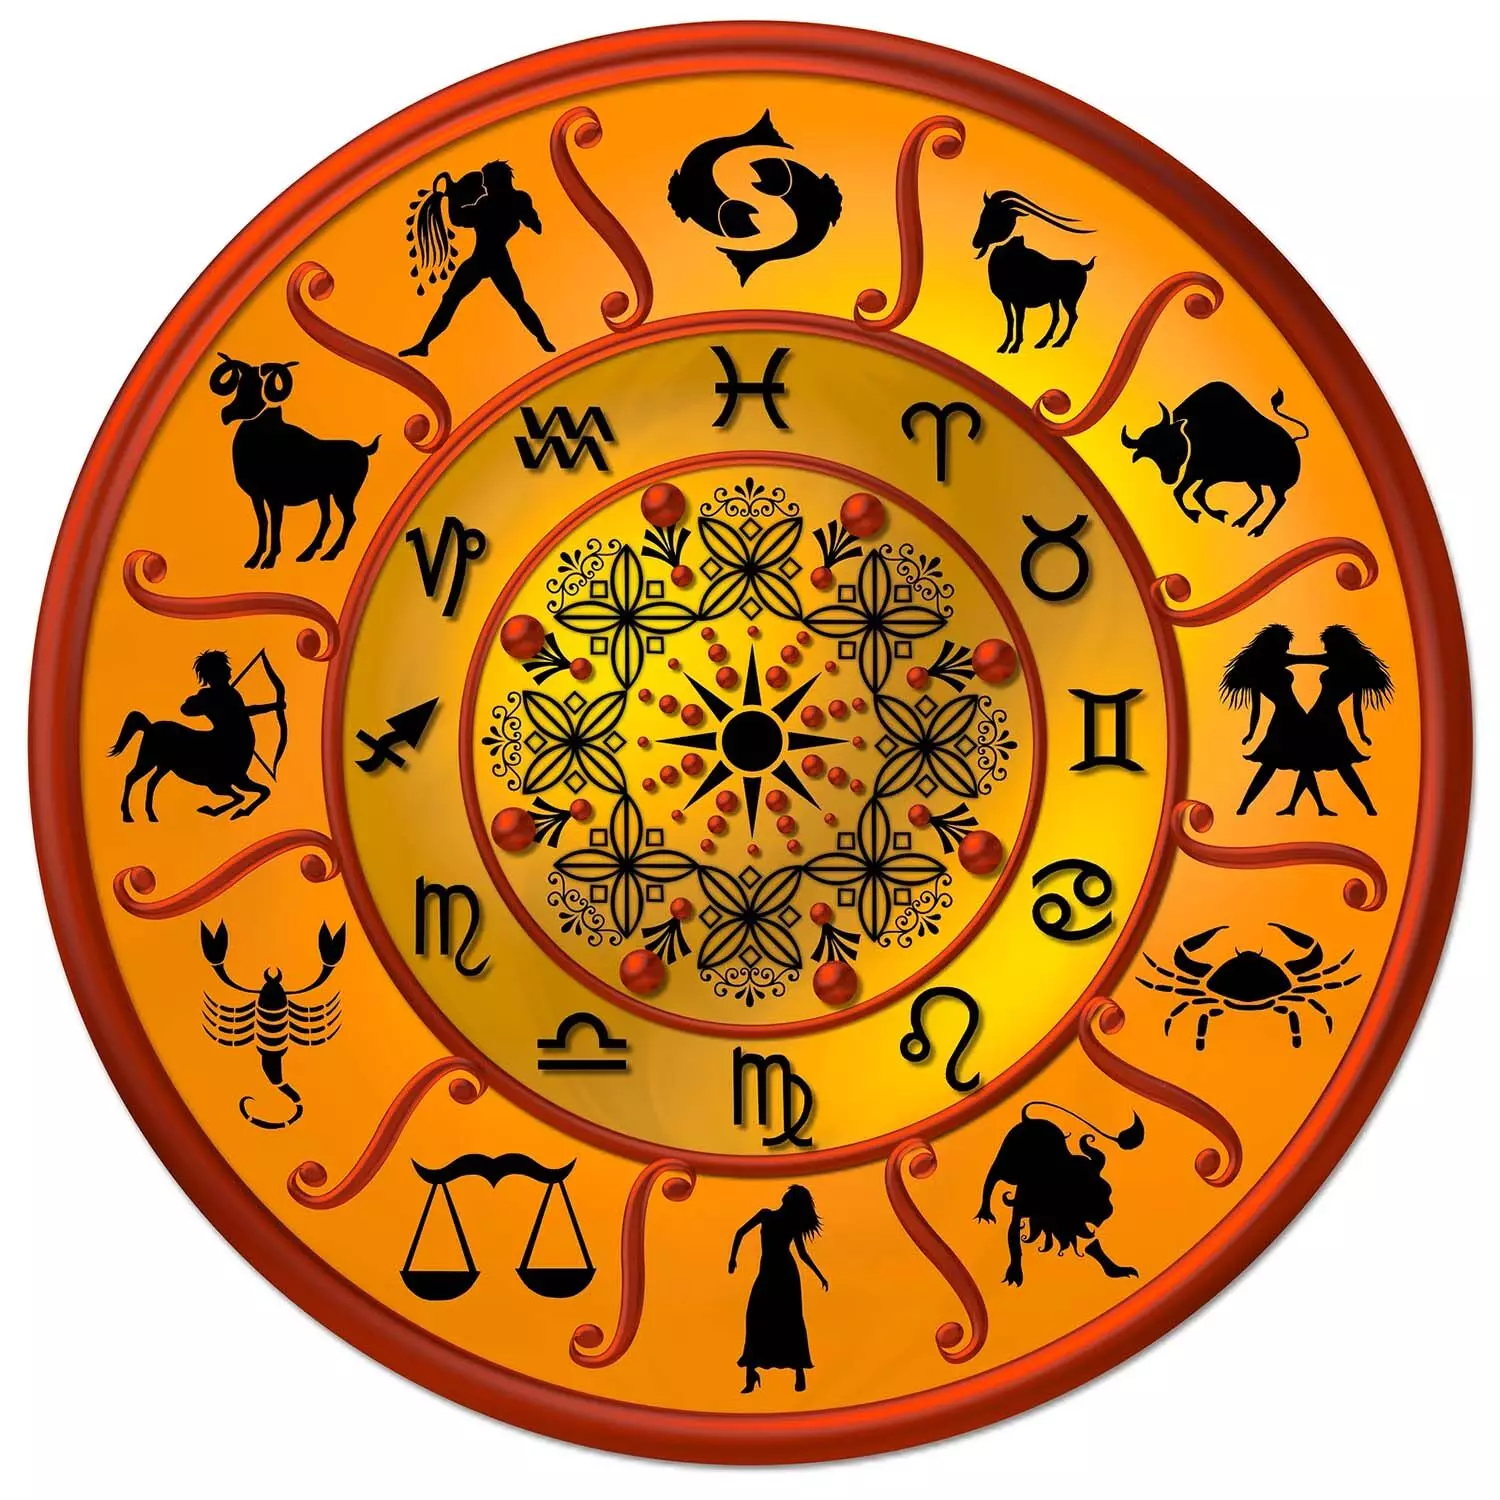 08 July – Know your todays horoscope